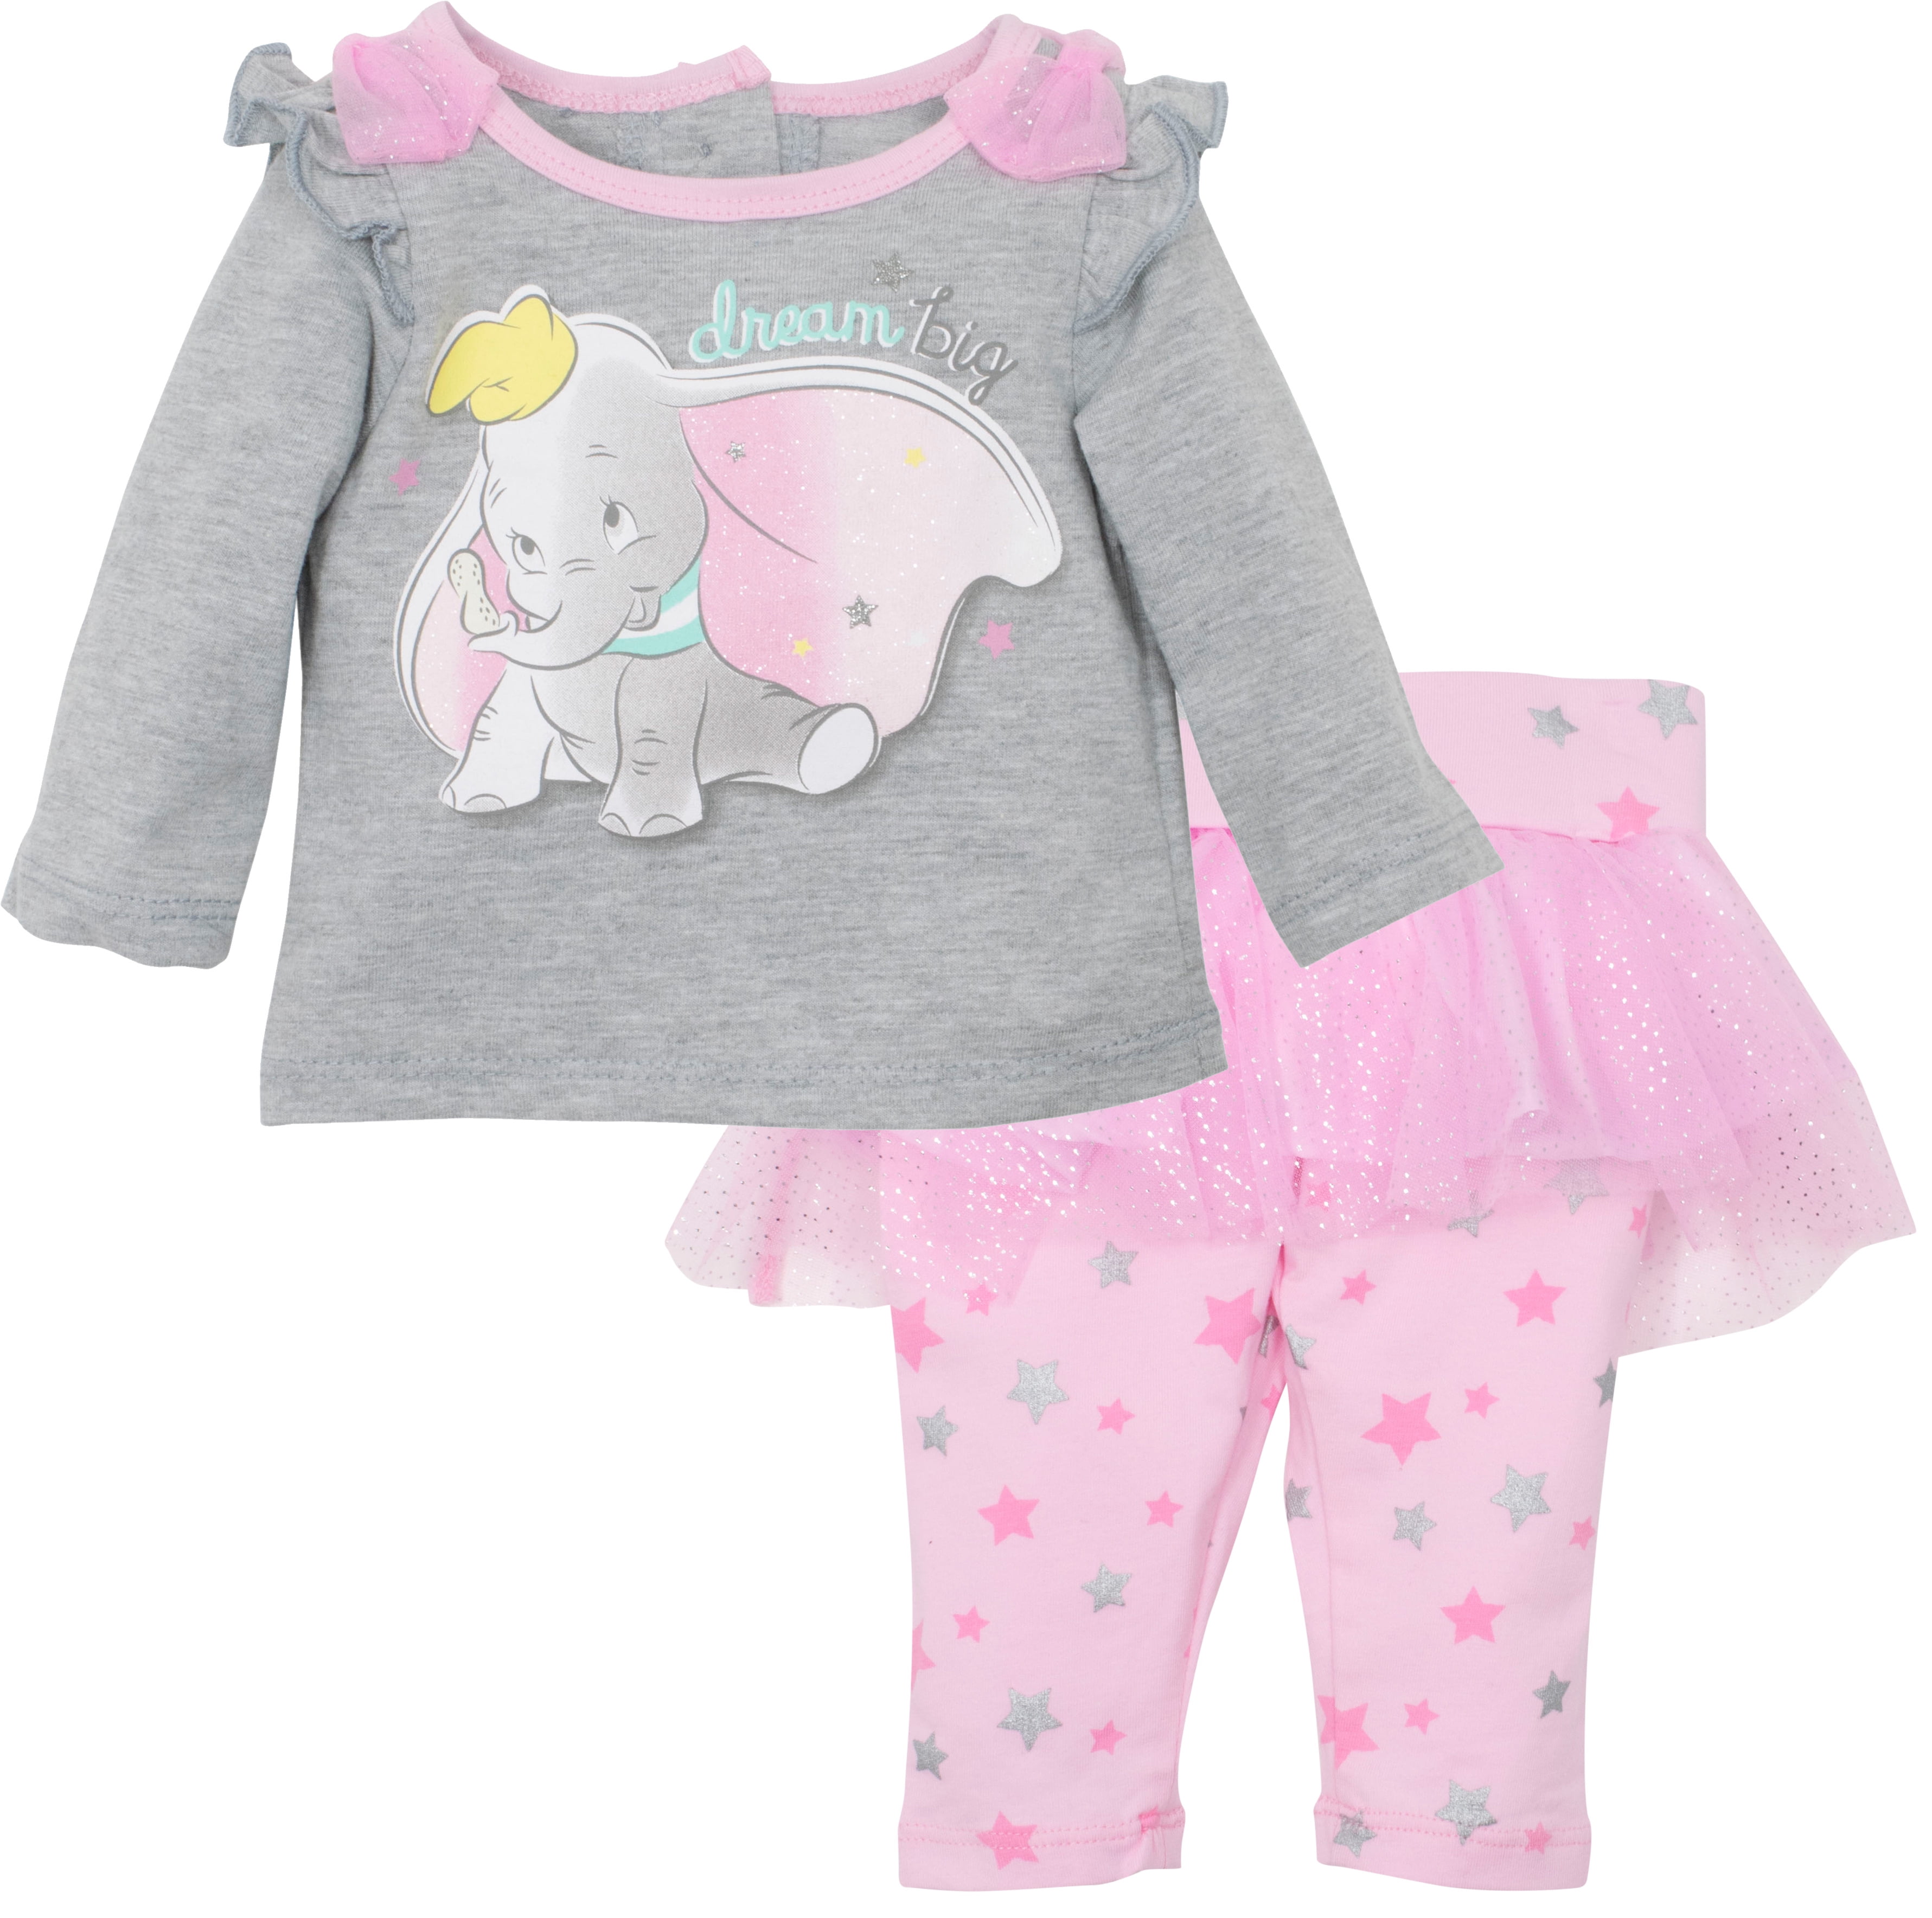 DISNEY STORE DUMBO BLOOMER SET FOR BABY NWT NICE DETAIL & REALLY ADORABLE 